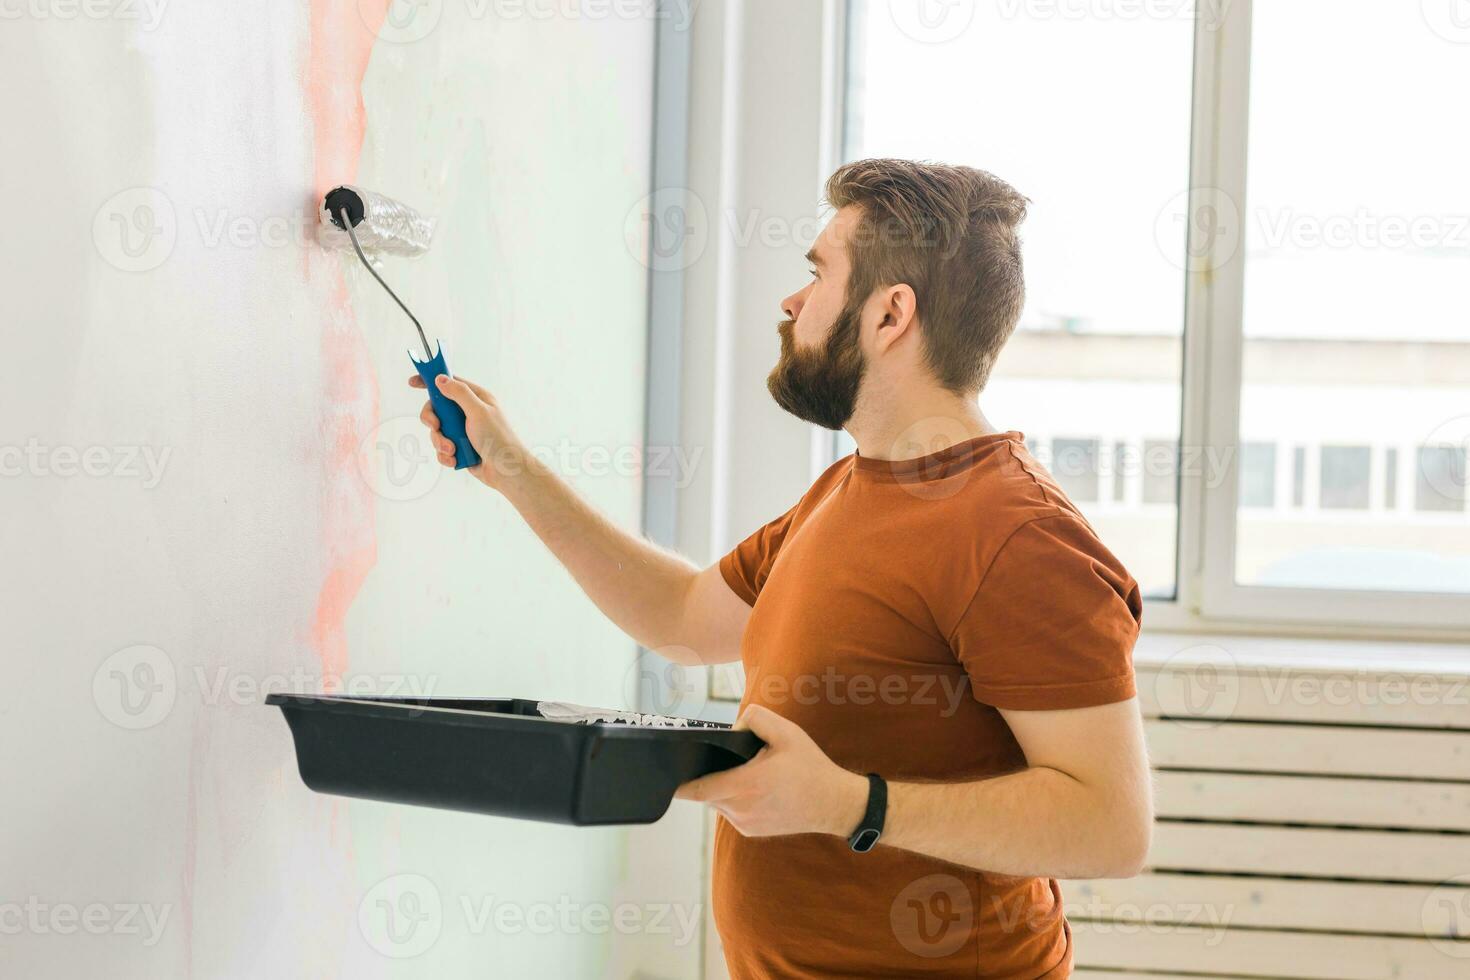 Man painting wall with paint roller - renovation and redecoration concept photo